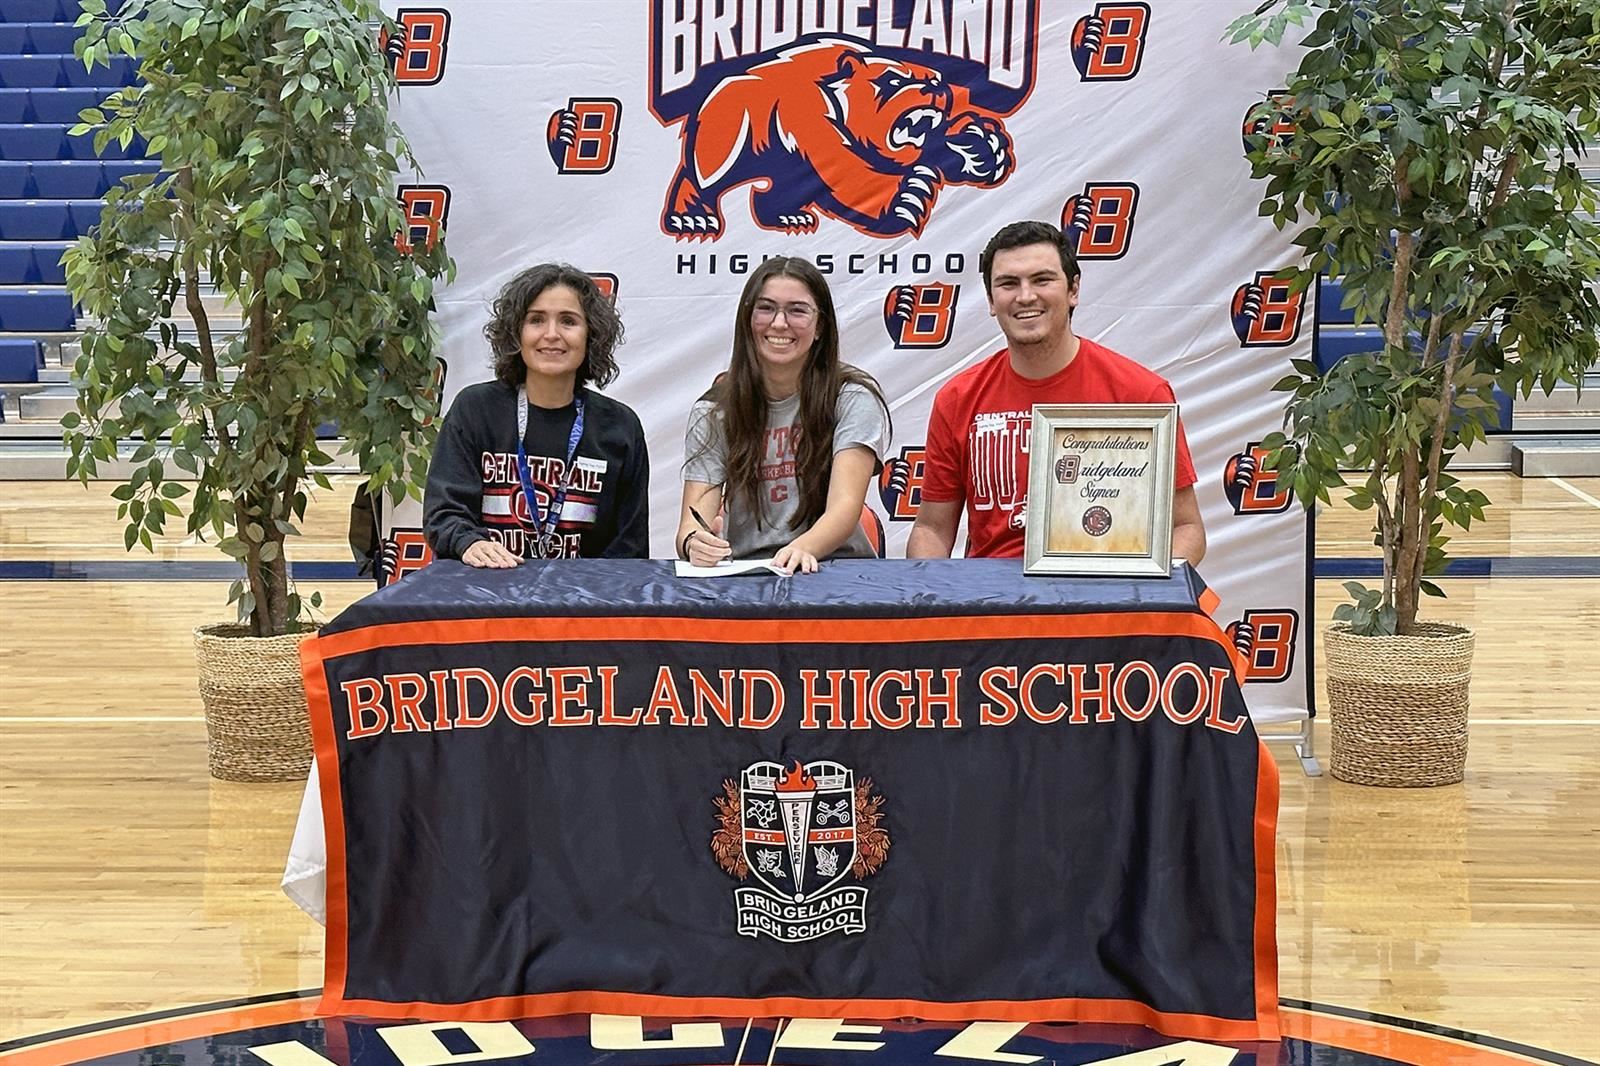 Bridgeland High School senior Jordan Penn, seated center, signed a letter of intent to play basketball at Central College.